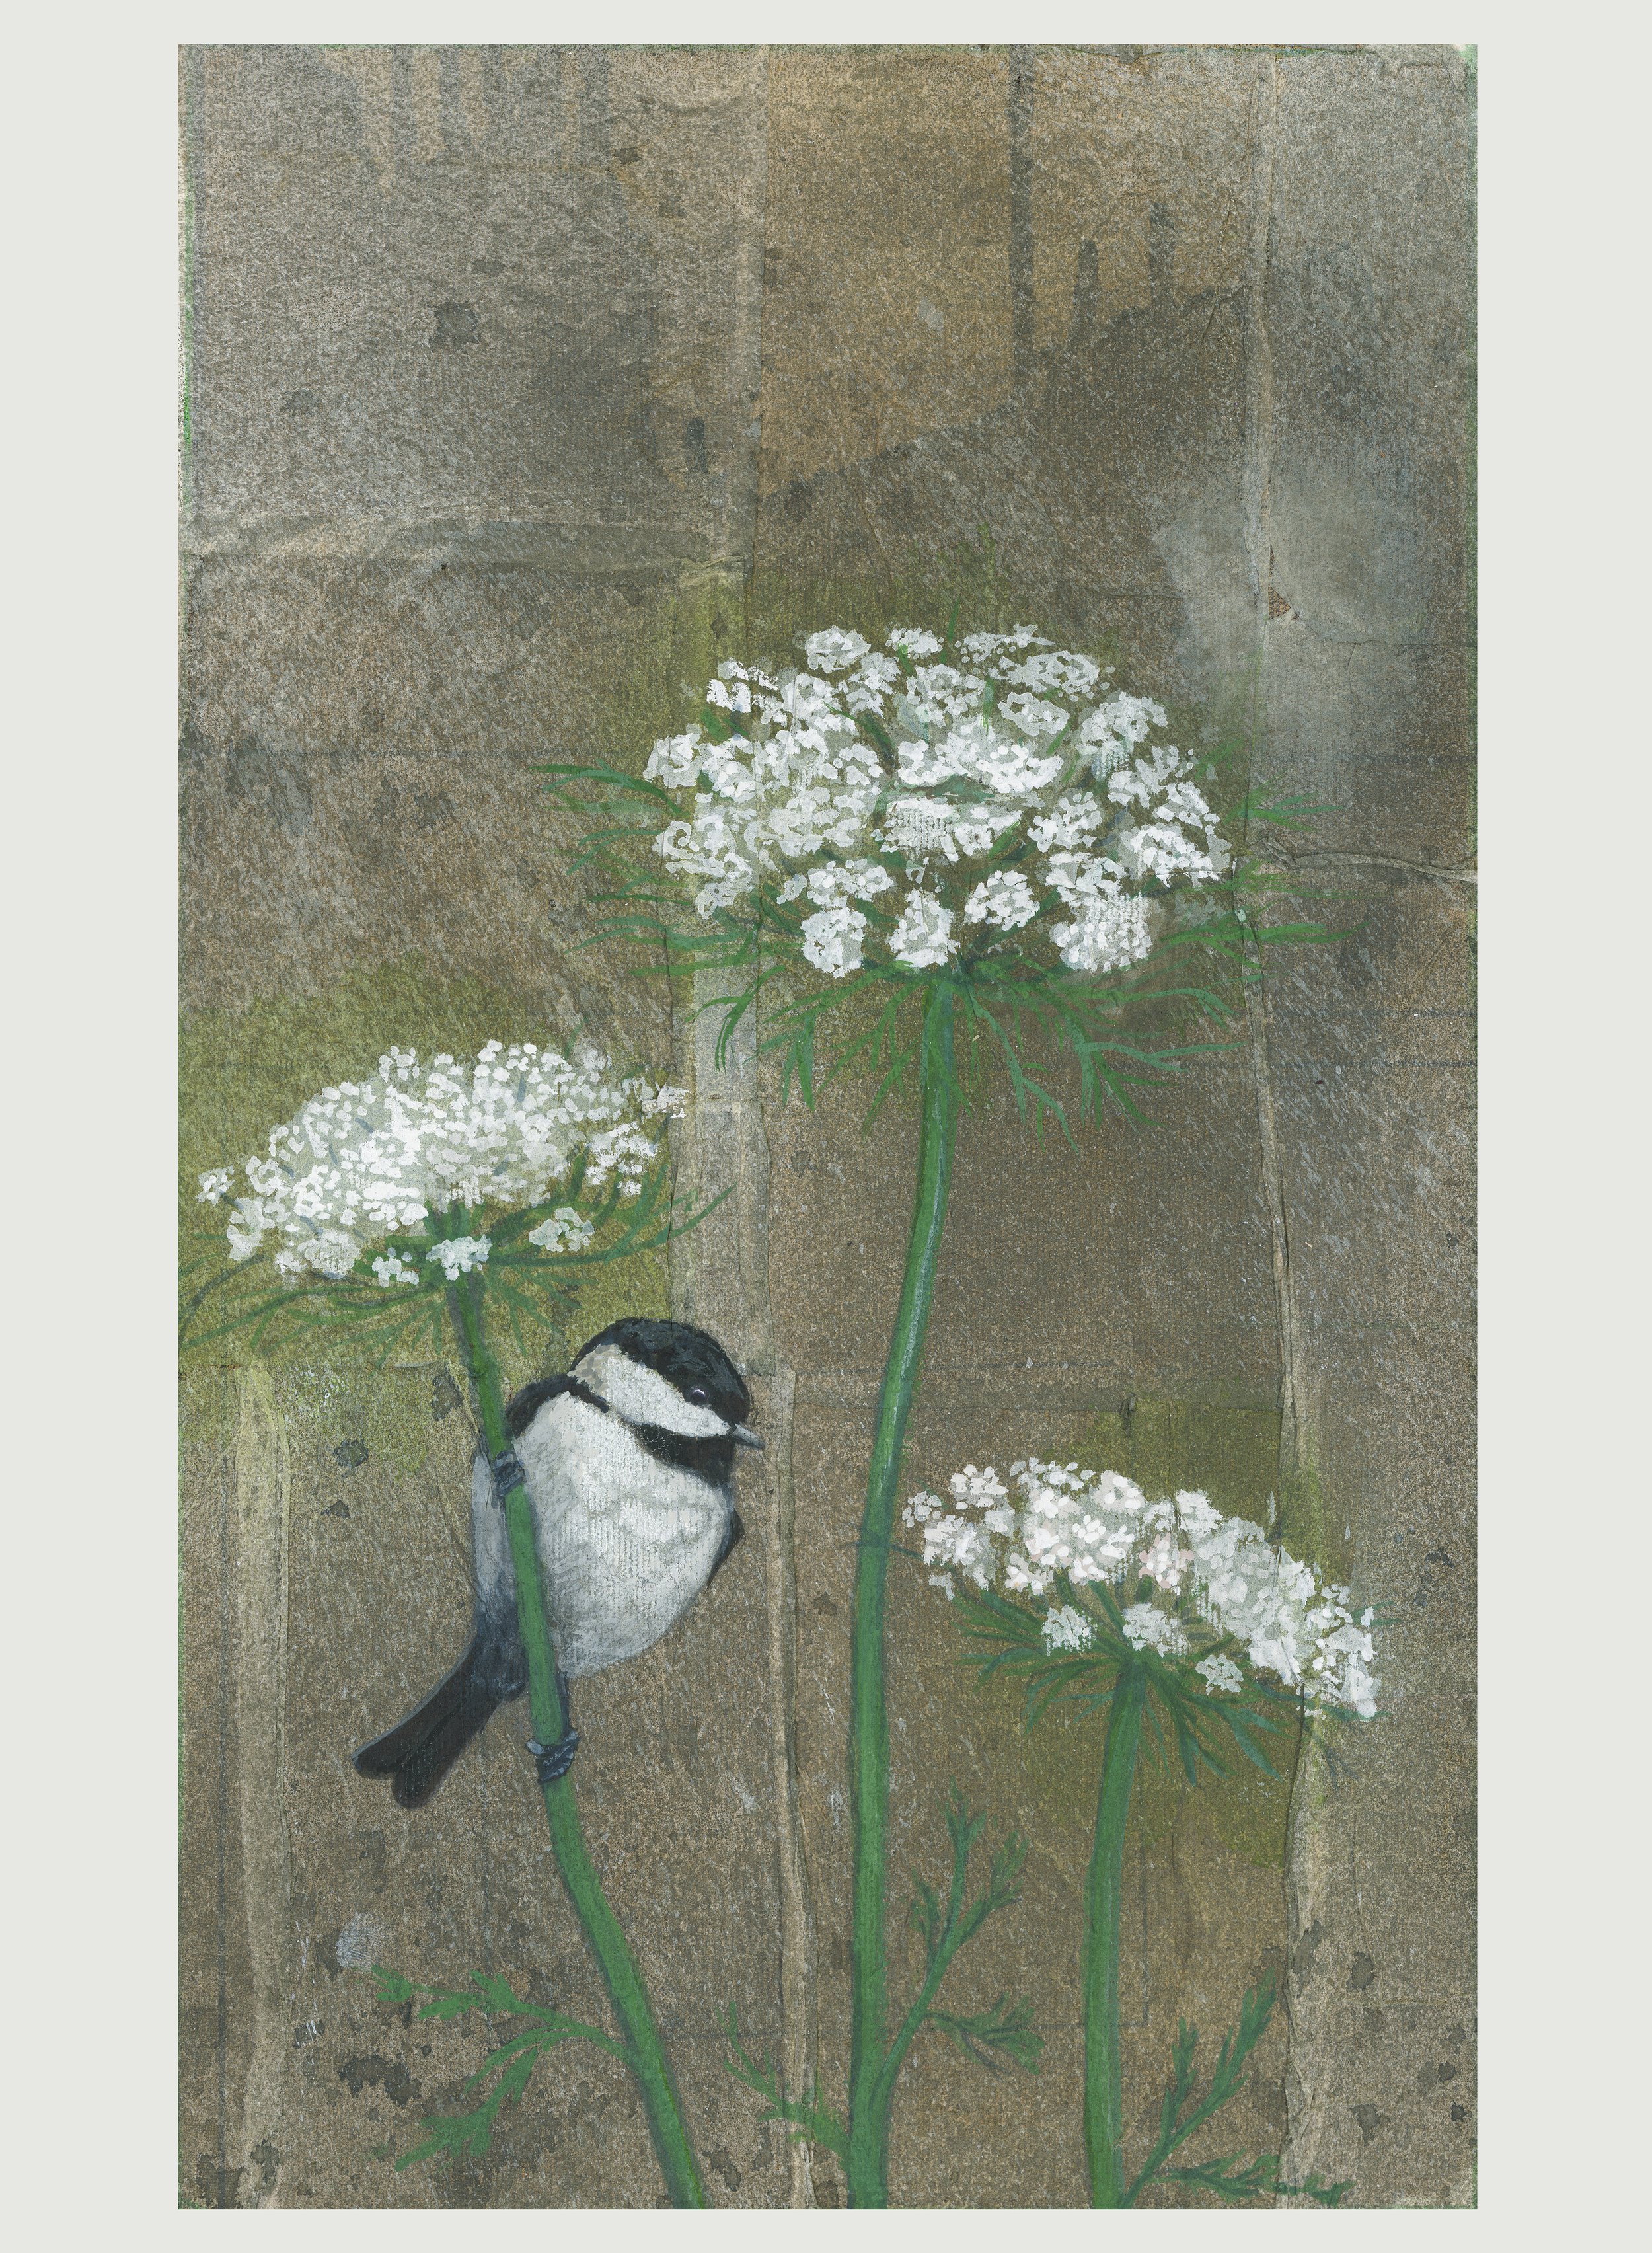 Black-capped Chickadee on Queen Anne's Lace 